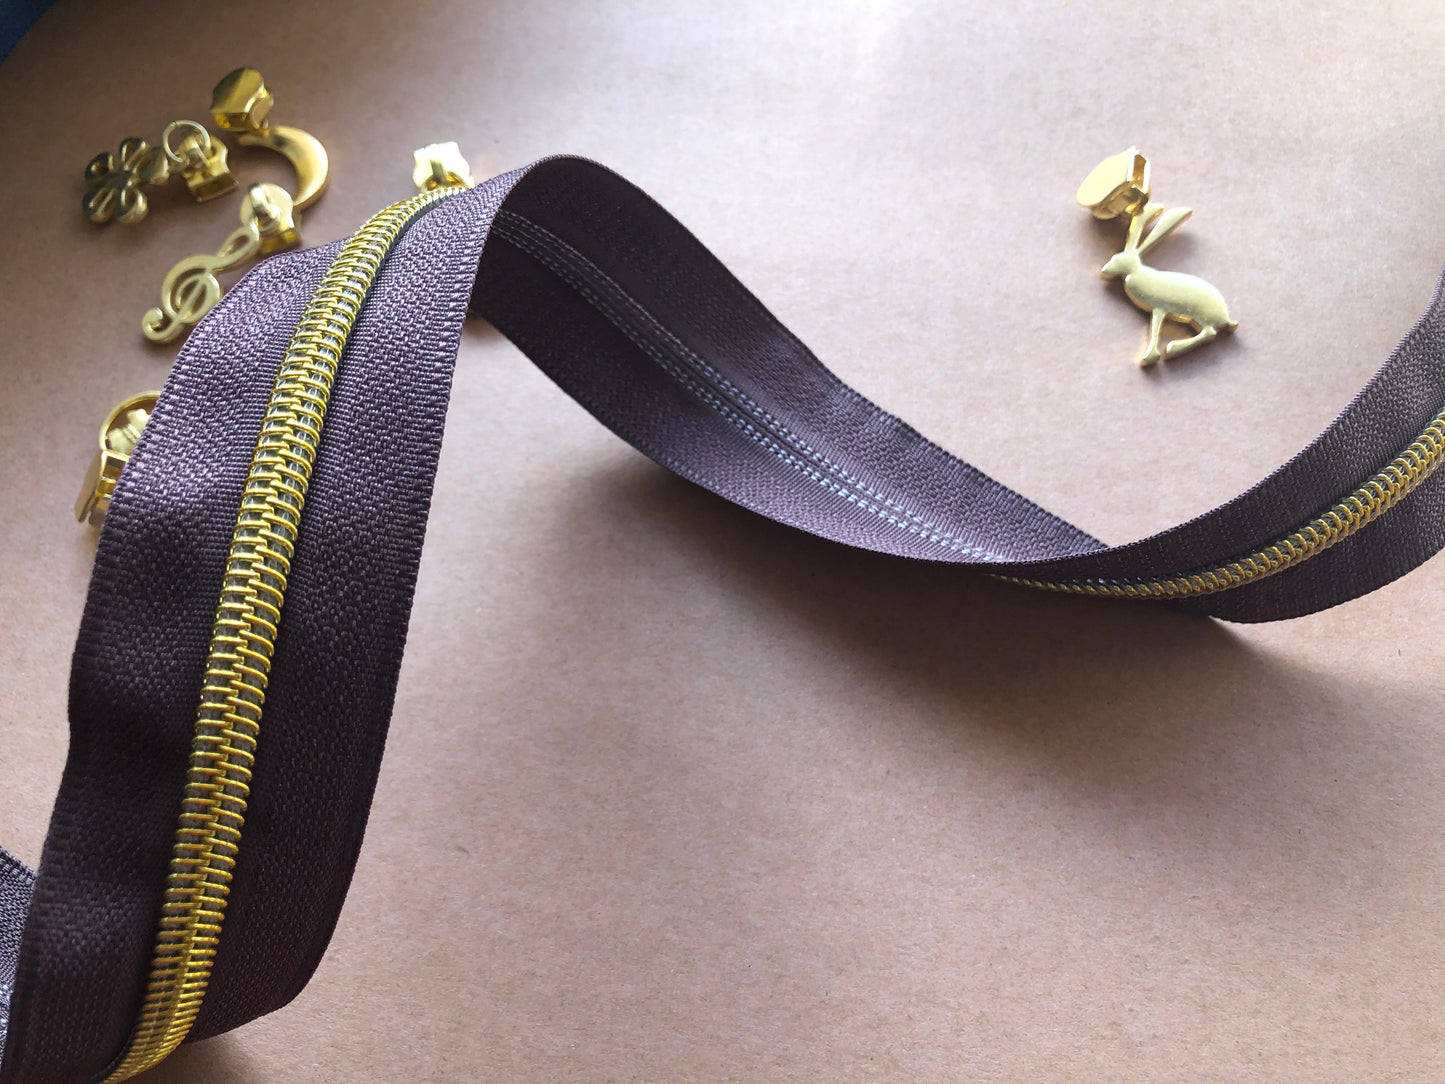 Gold color teeth size 5 zipper tapes, cut to length zipper tapes, zipper tapes for bags, zipper tape by the metre